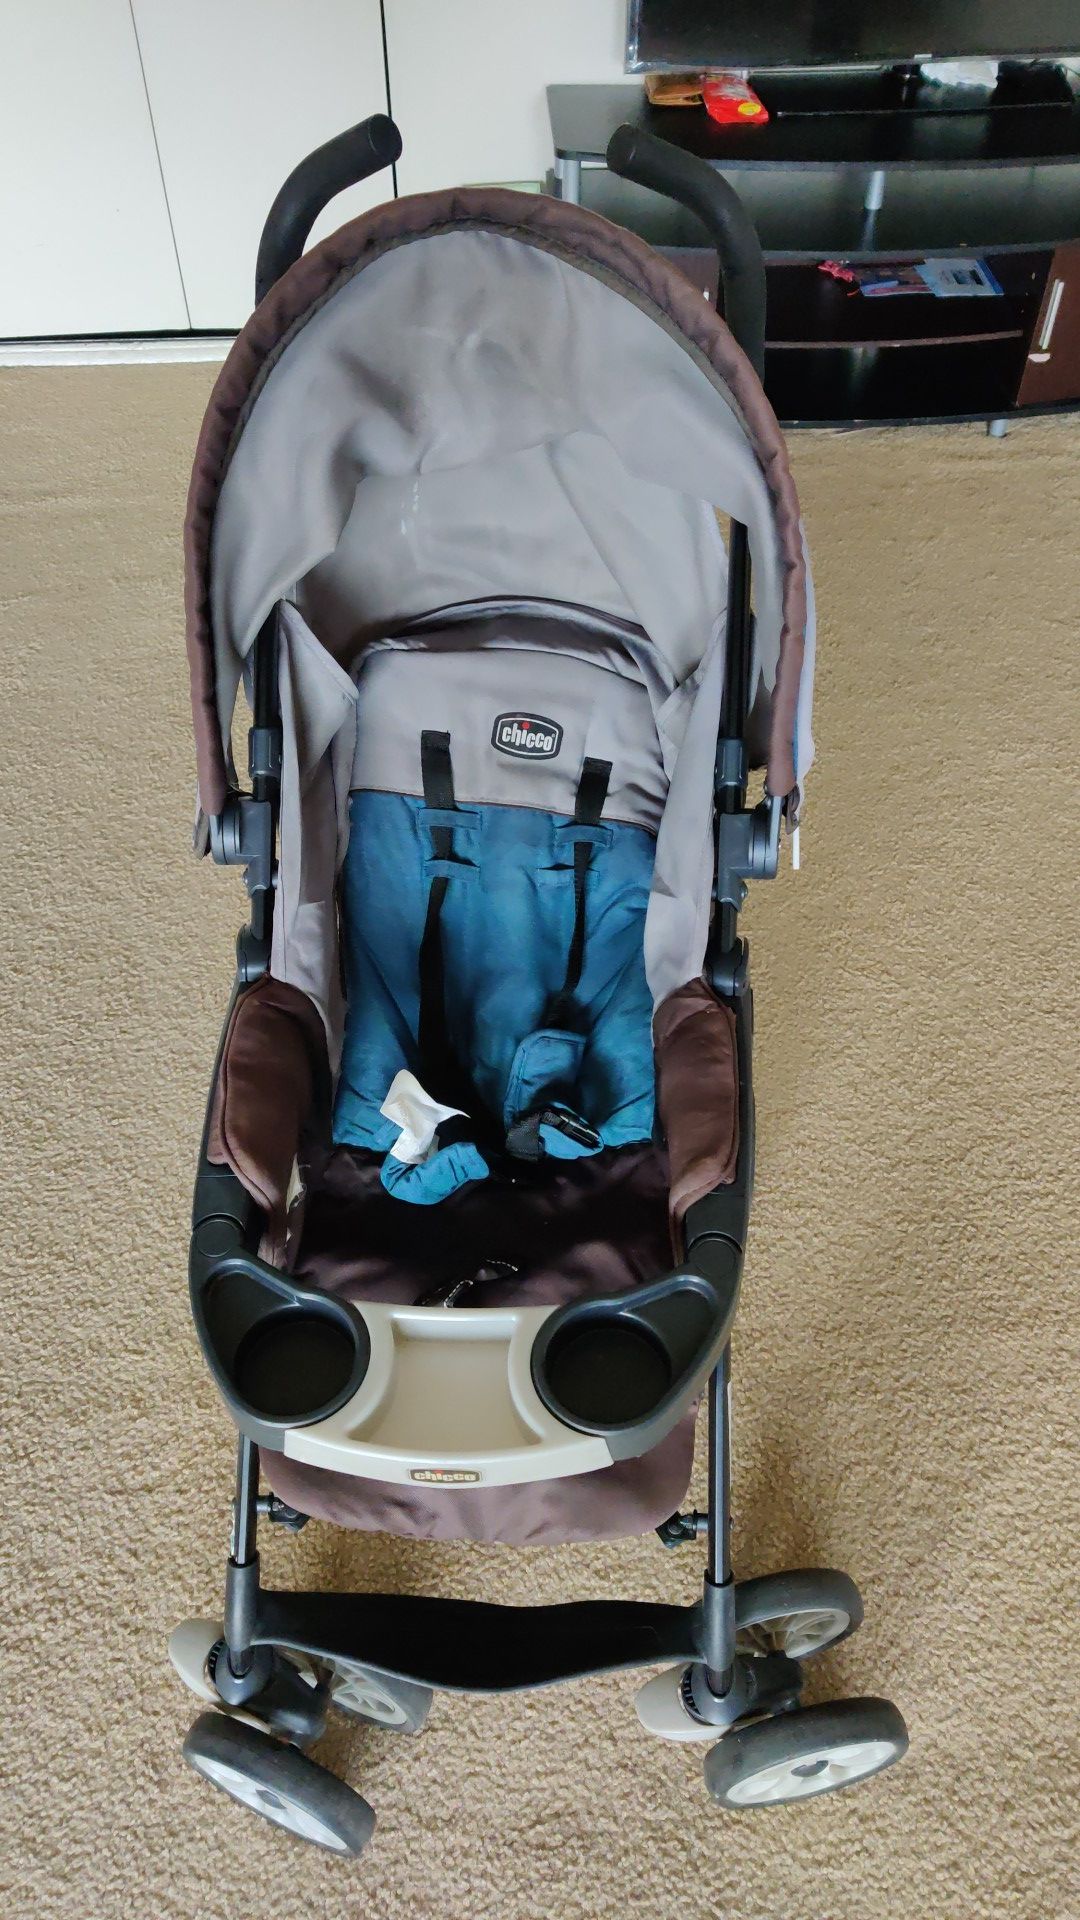 Chicco stroller click connect - Used